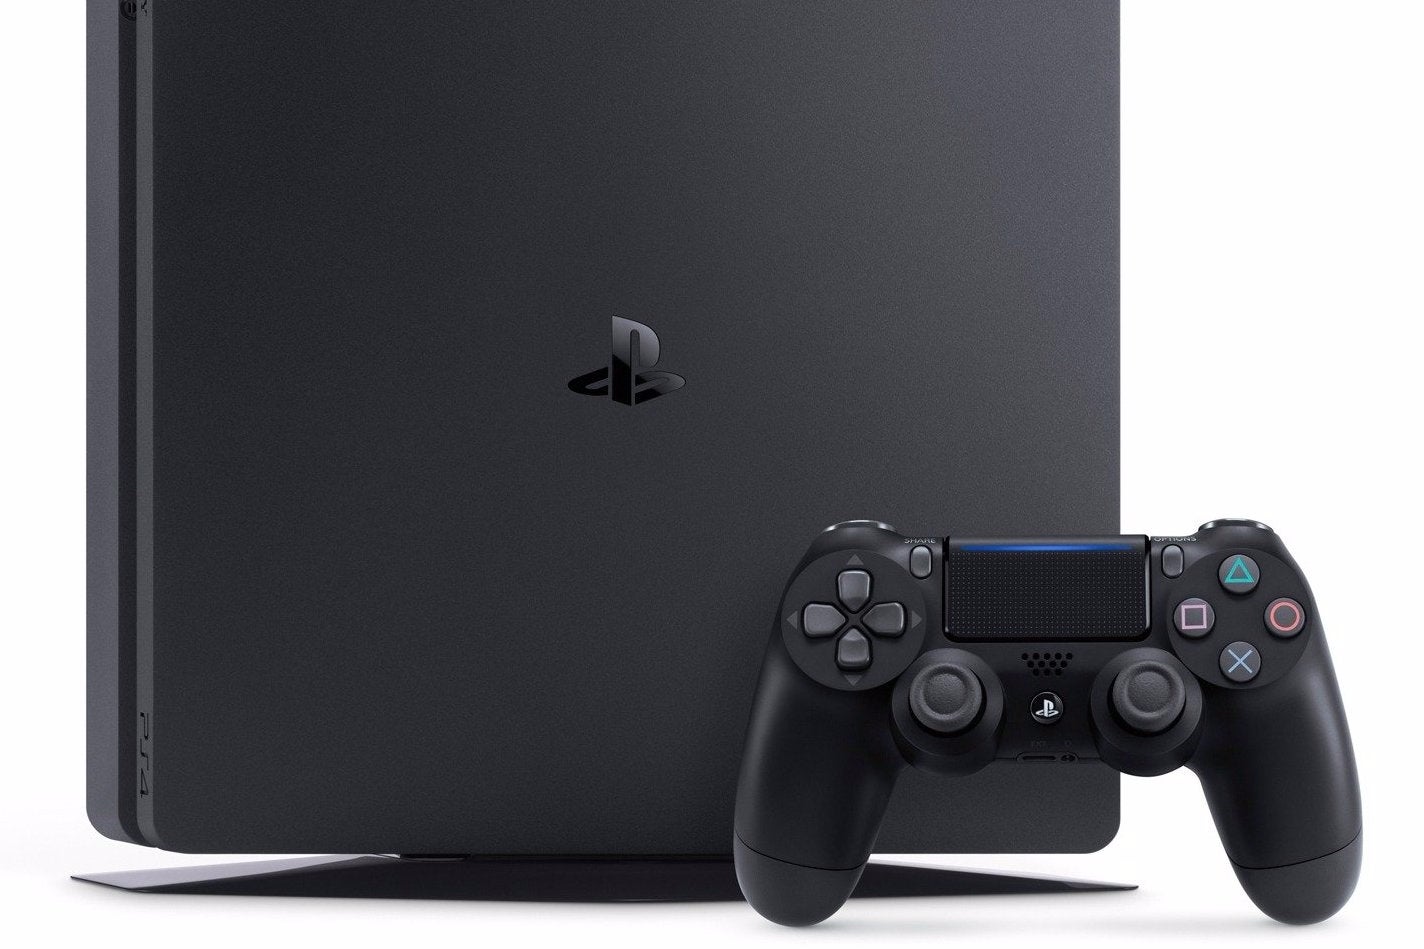 PS4 Slim release date, price, specs, new DualShock 4 and